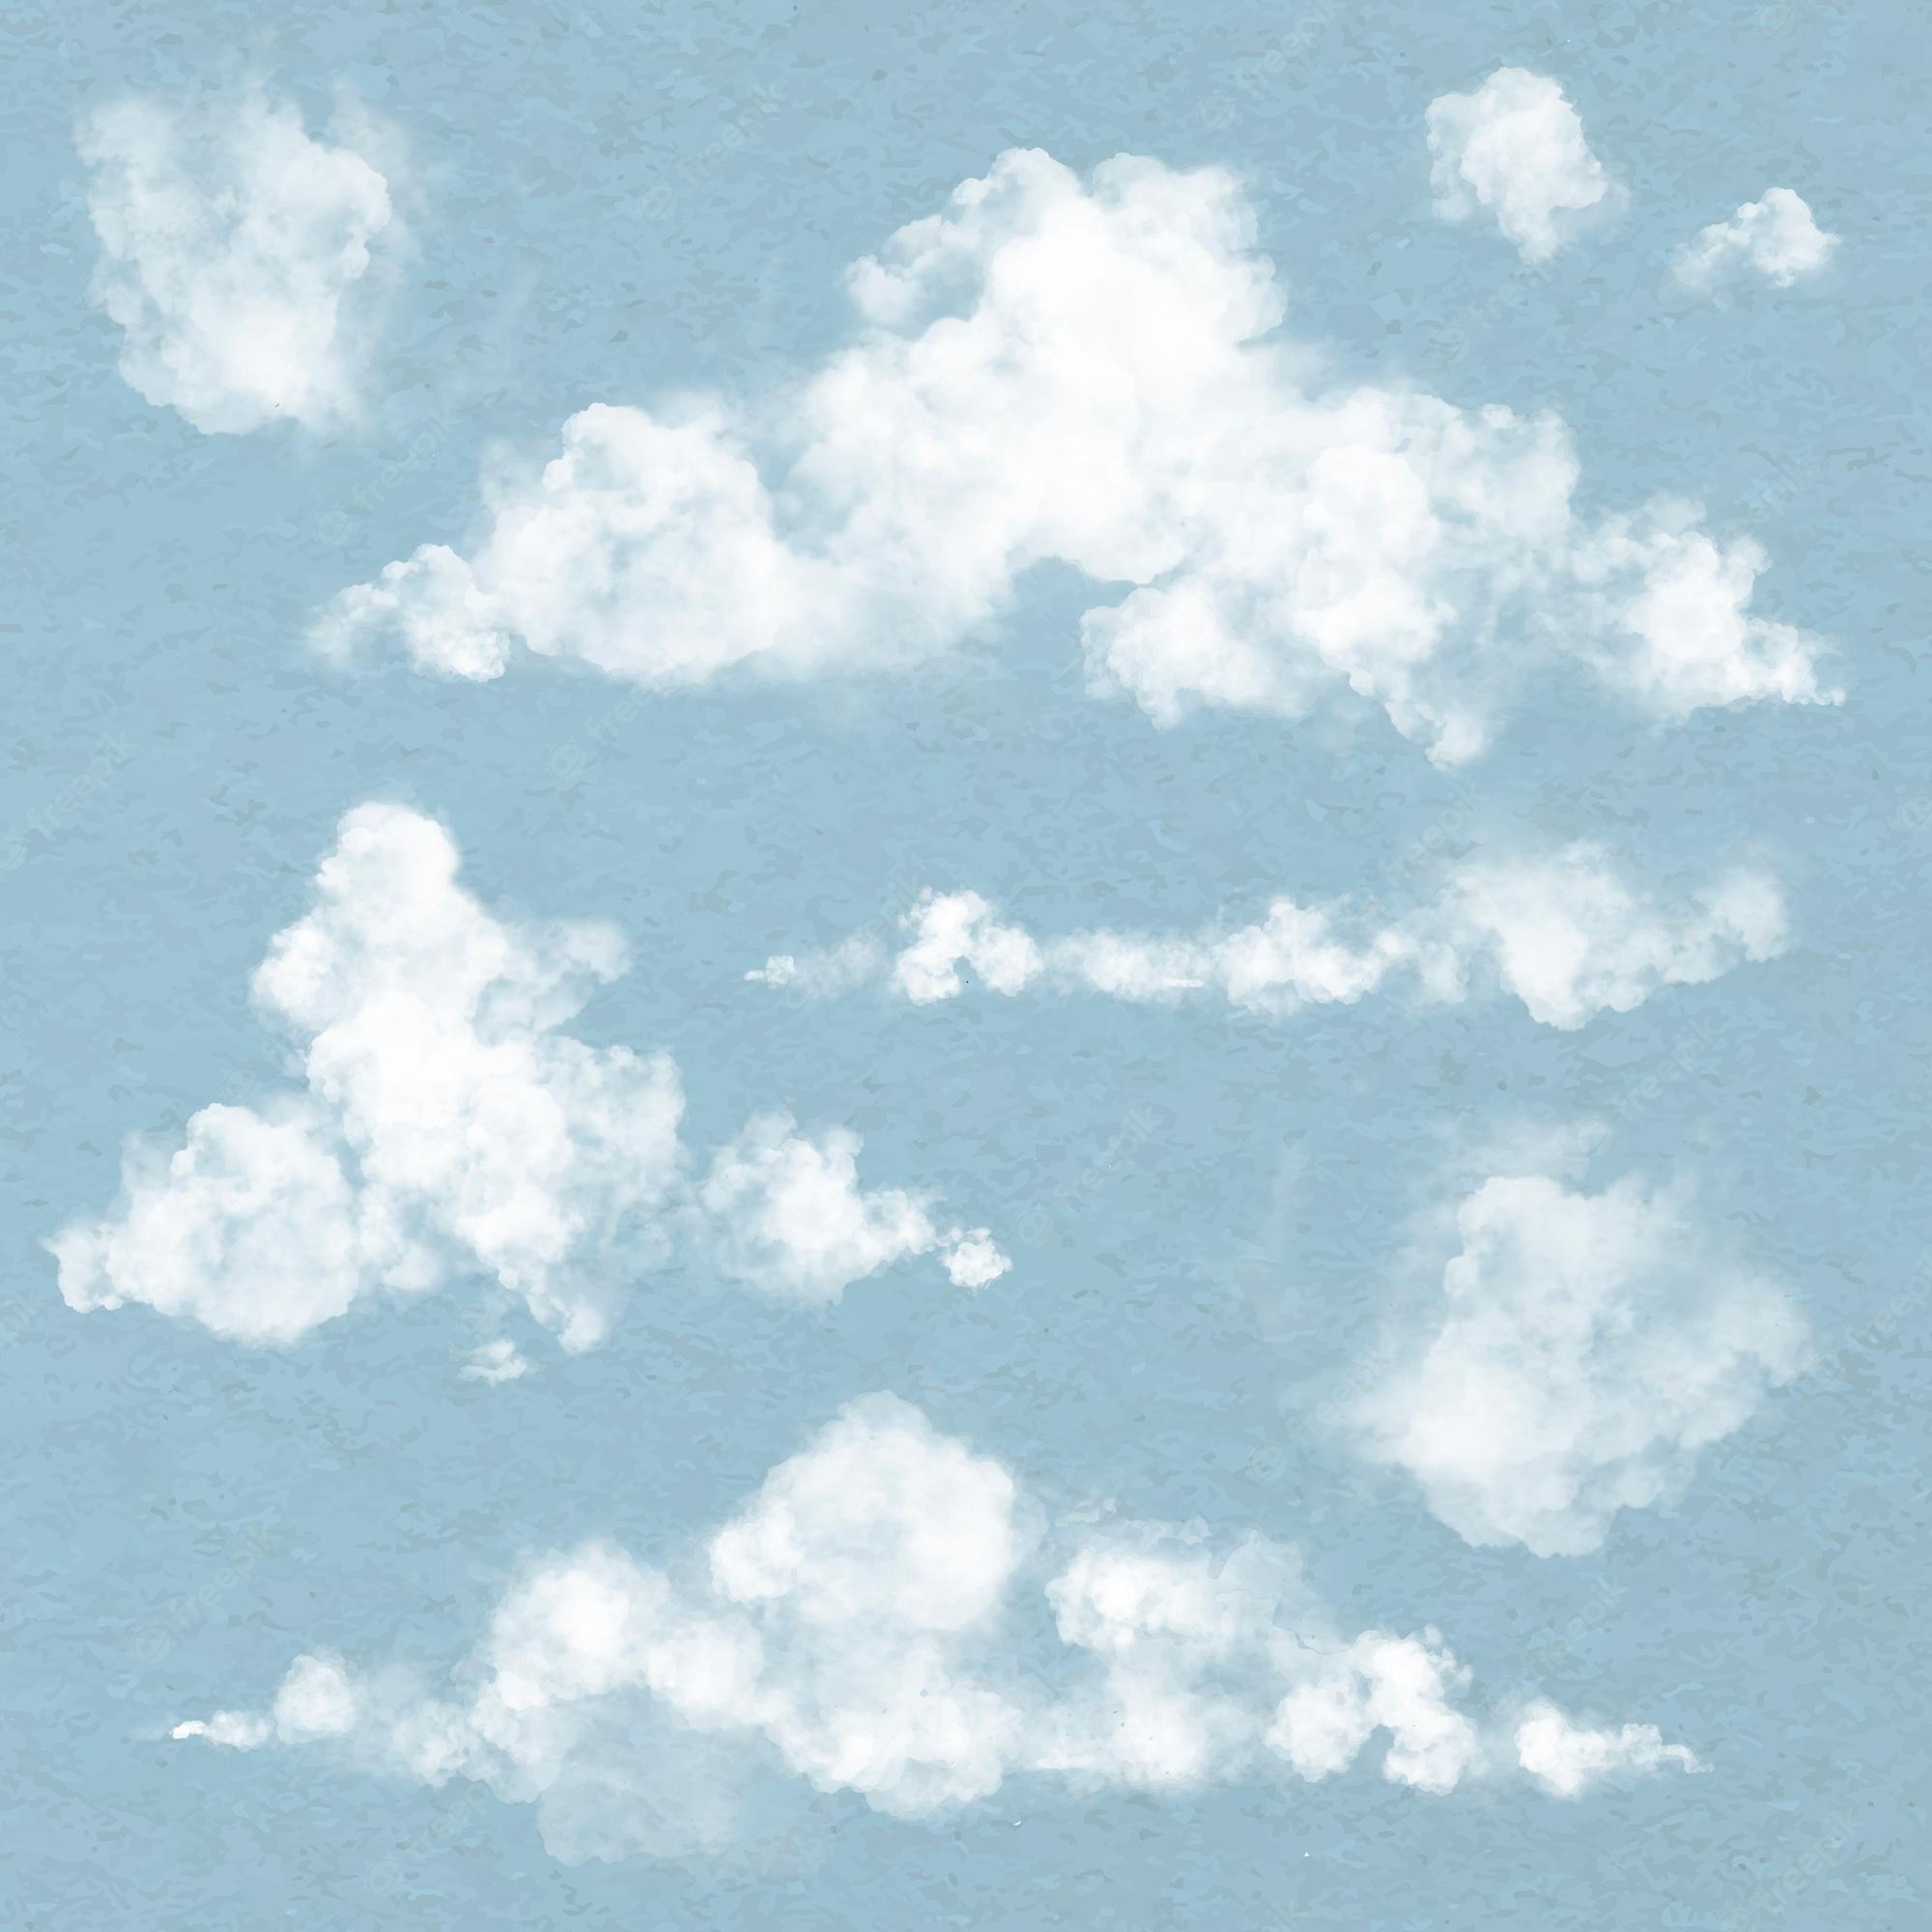 Background aesthetic clouds Image. Free Vectors, & PSD